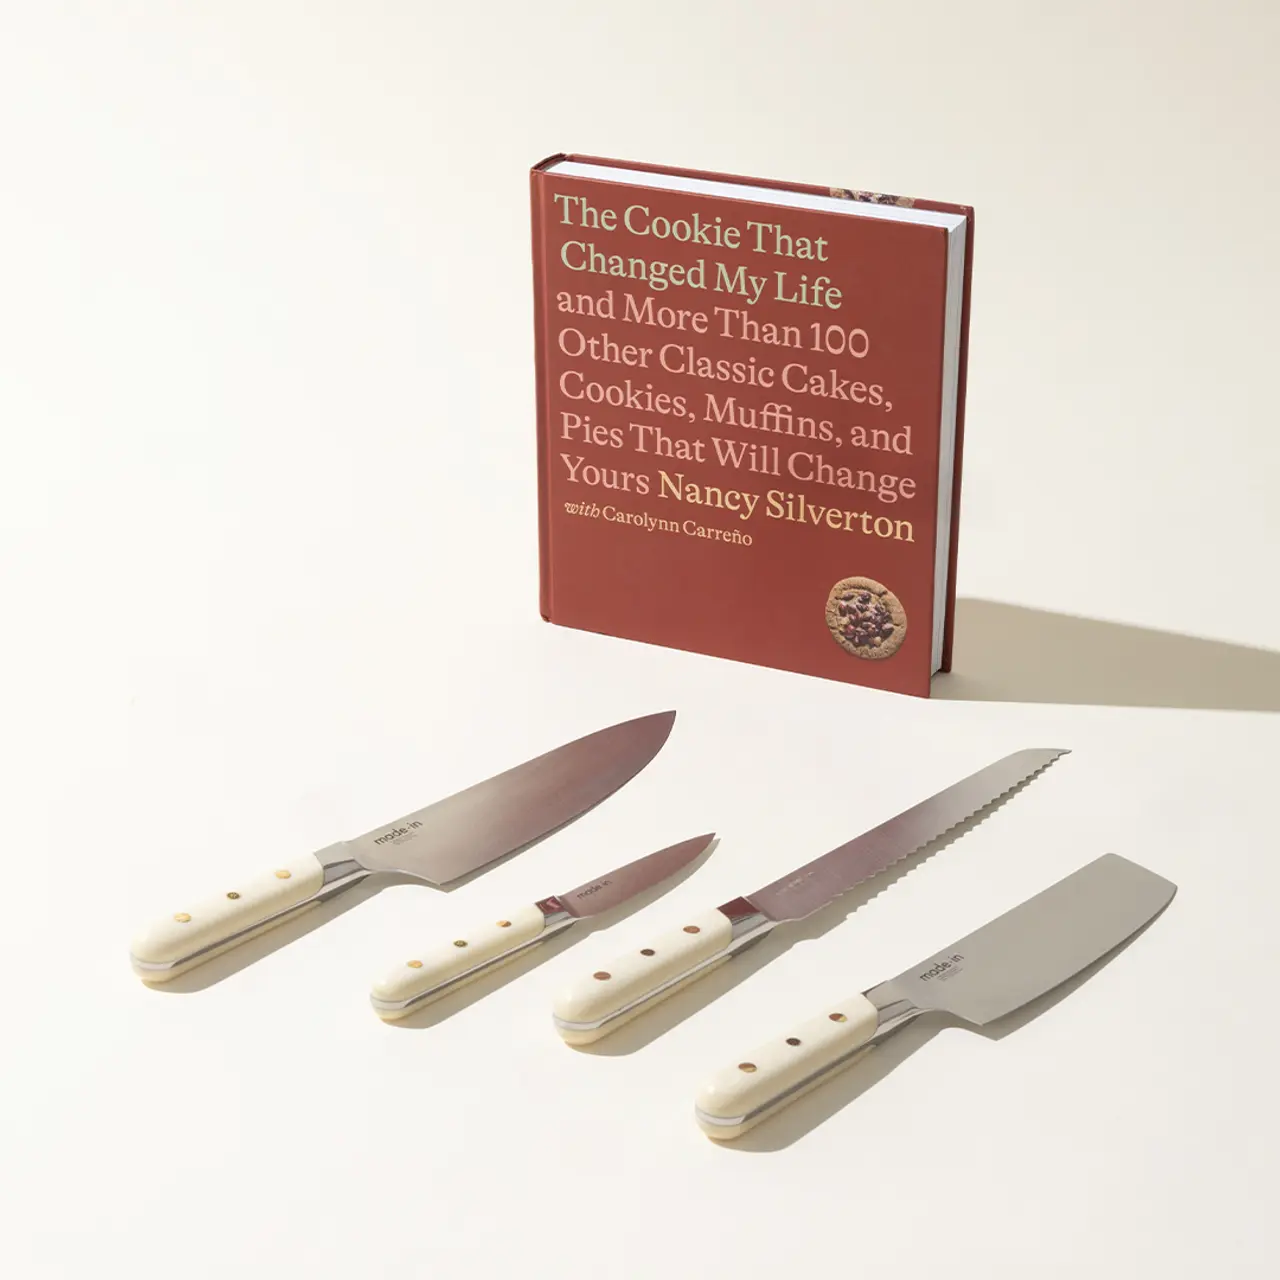 A cookbook titled "The Cookie That Changed My Life" is propped up in the background with a set of four kitchen knives displayed in the foreground on a light surface.